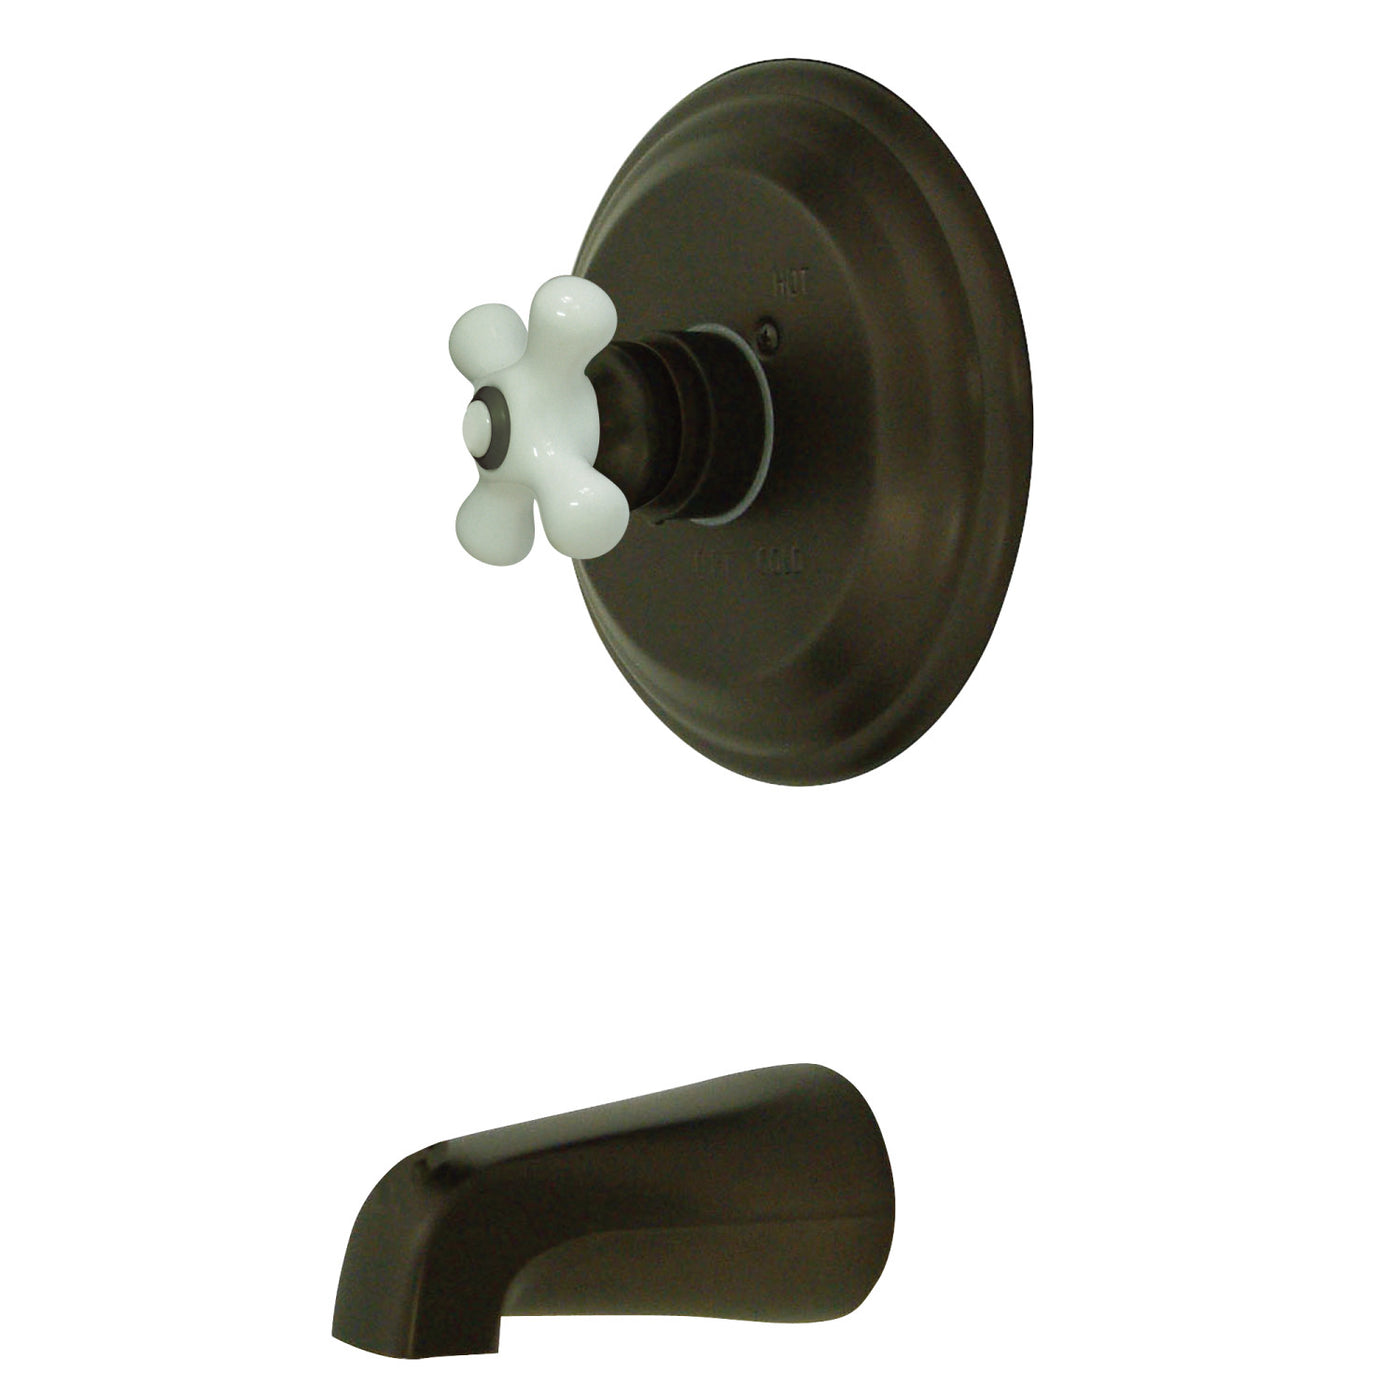 Elements of Design EB3635PXTO Tub Only Faucet, Oil Rubbed Bronze